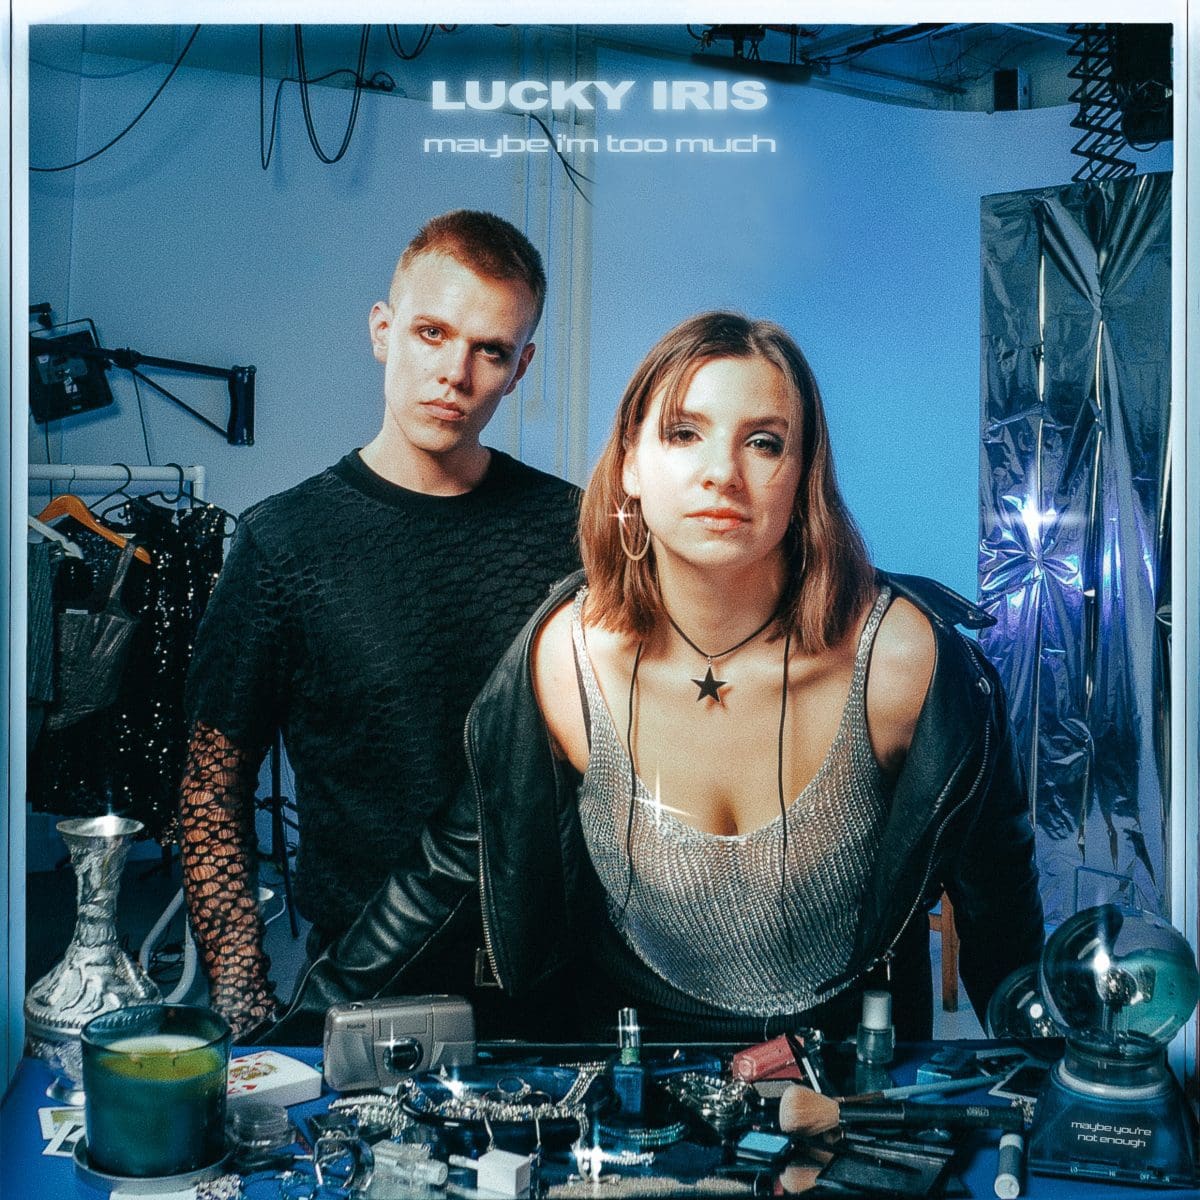 UK synthpop act Lucky Iris returns with EP 'Maybe I'm Too Much'